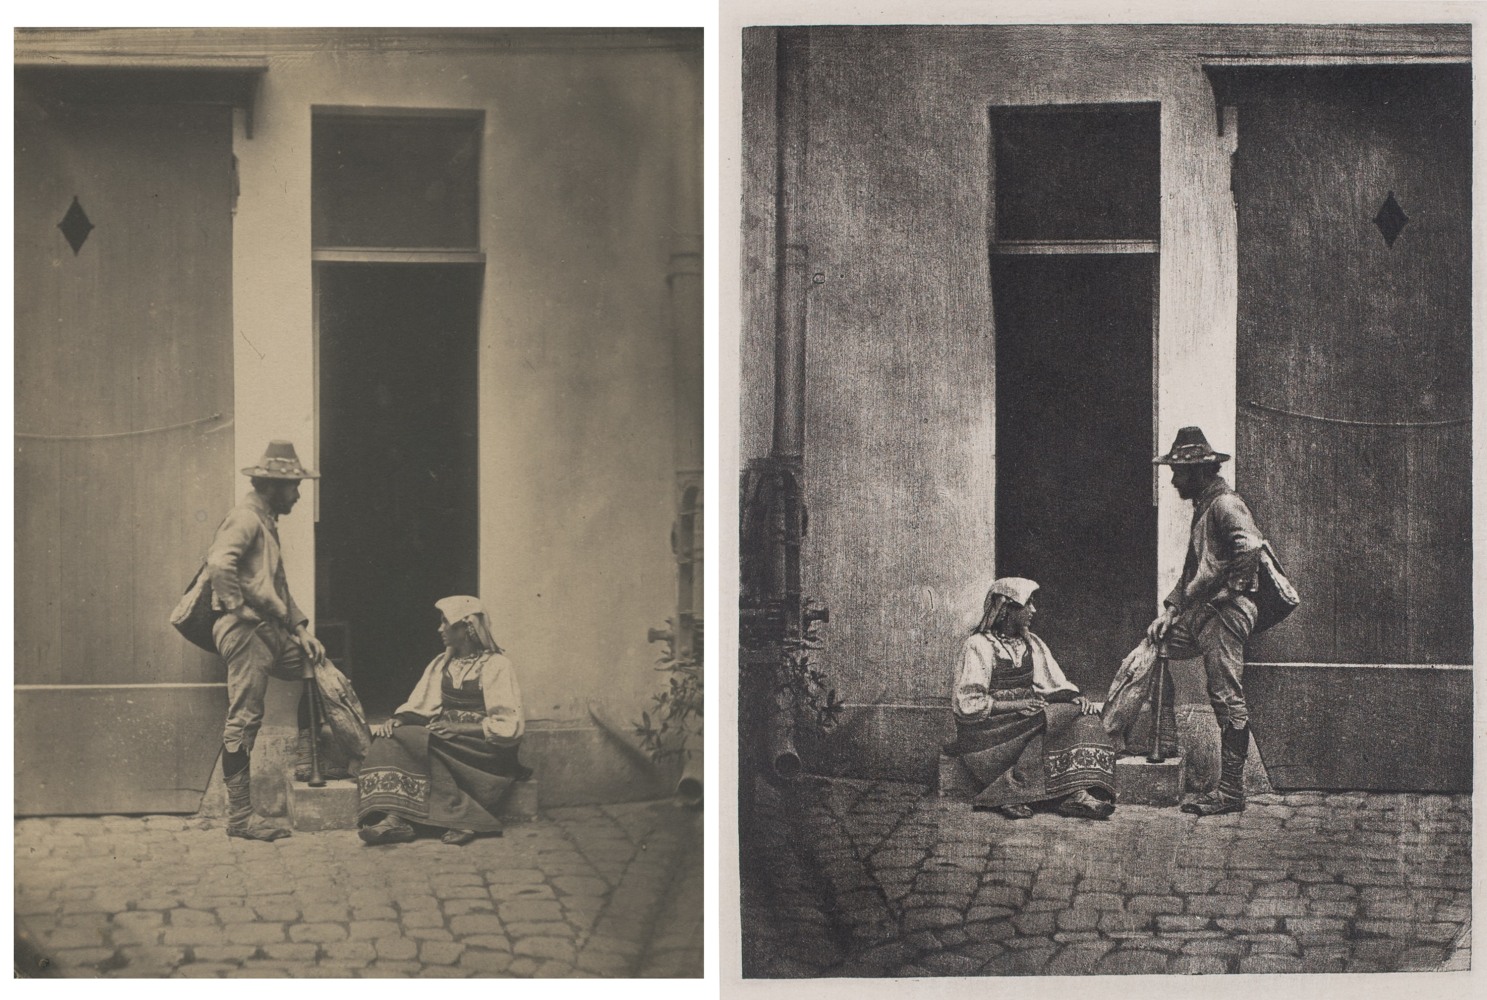 Charles Nègre (French, 1820-1880),“Pifferaro and Romani woman in Nègre's doorway, l'île Saint-Louis,” 1853-1854, Salt print from a collodion negative, together with a modern heliogravure from the original steel plate printed by Atelier de Saint-Prex, Switzerland, from André Jammes 1982 portfolio.